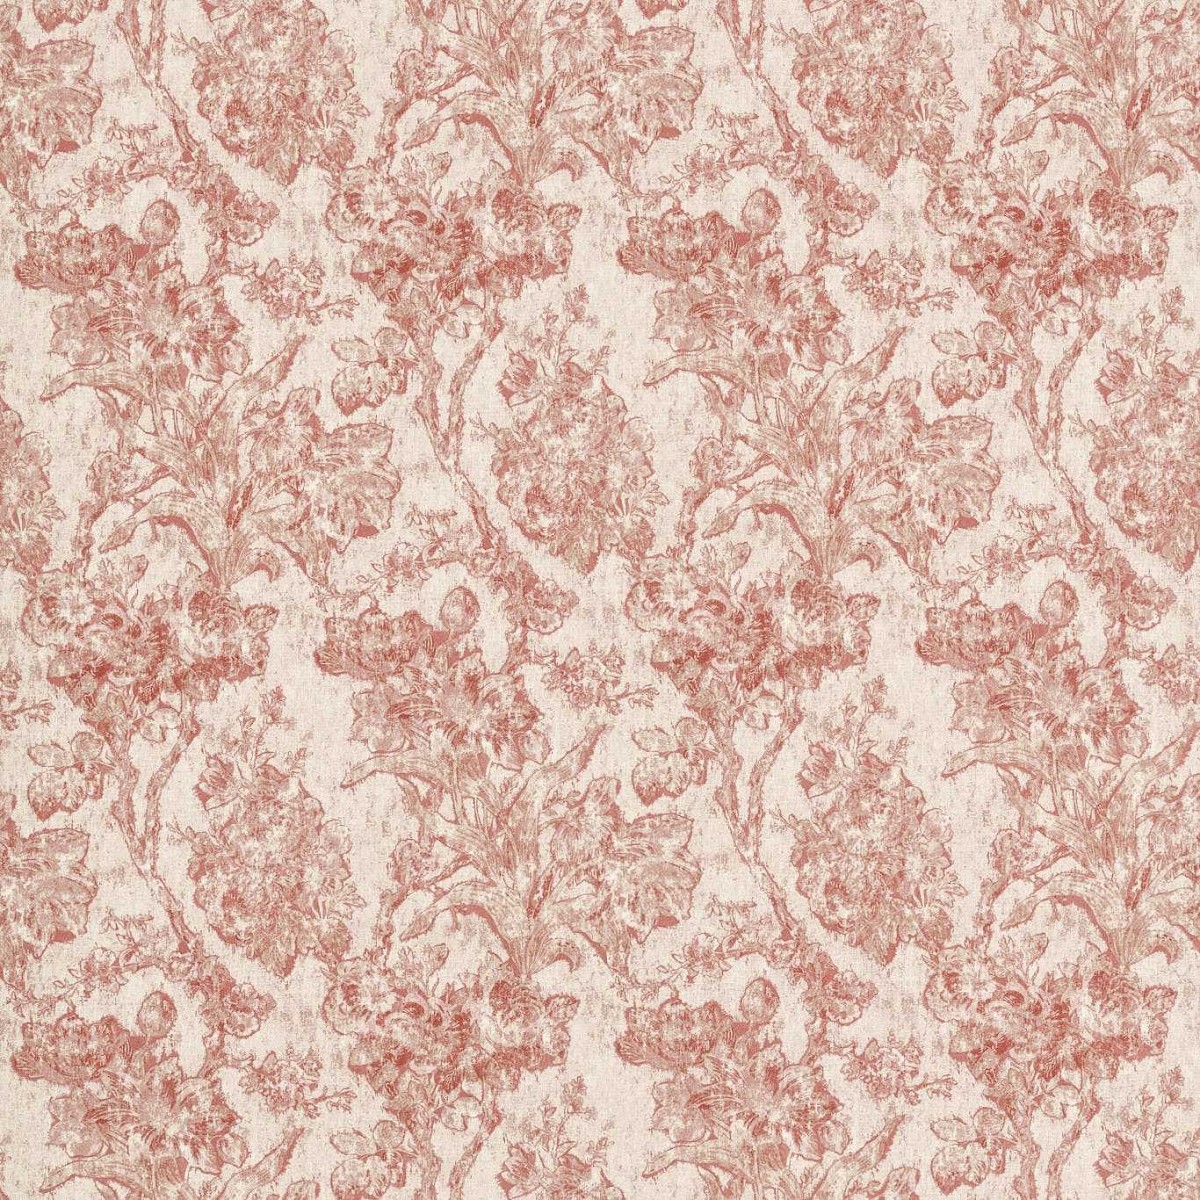 Fringed Tulip Toile Putty Fabric by Sanderson